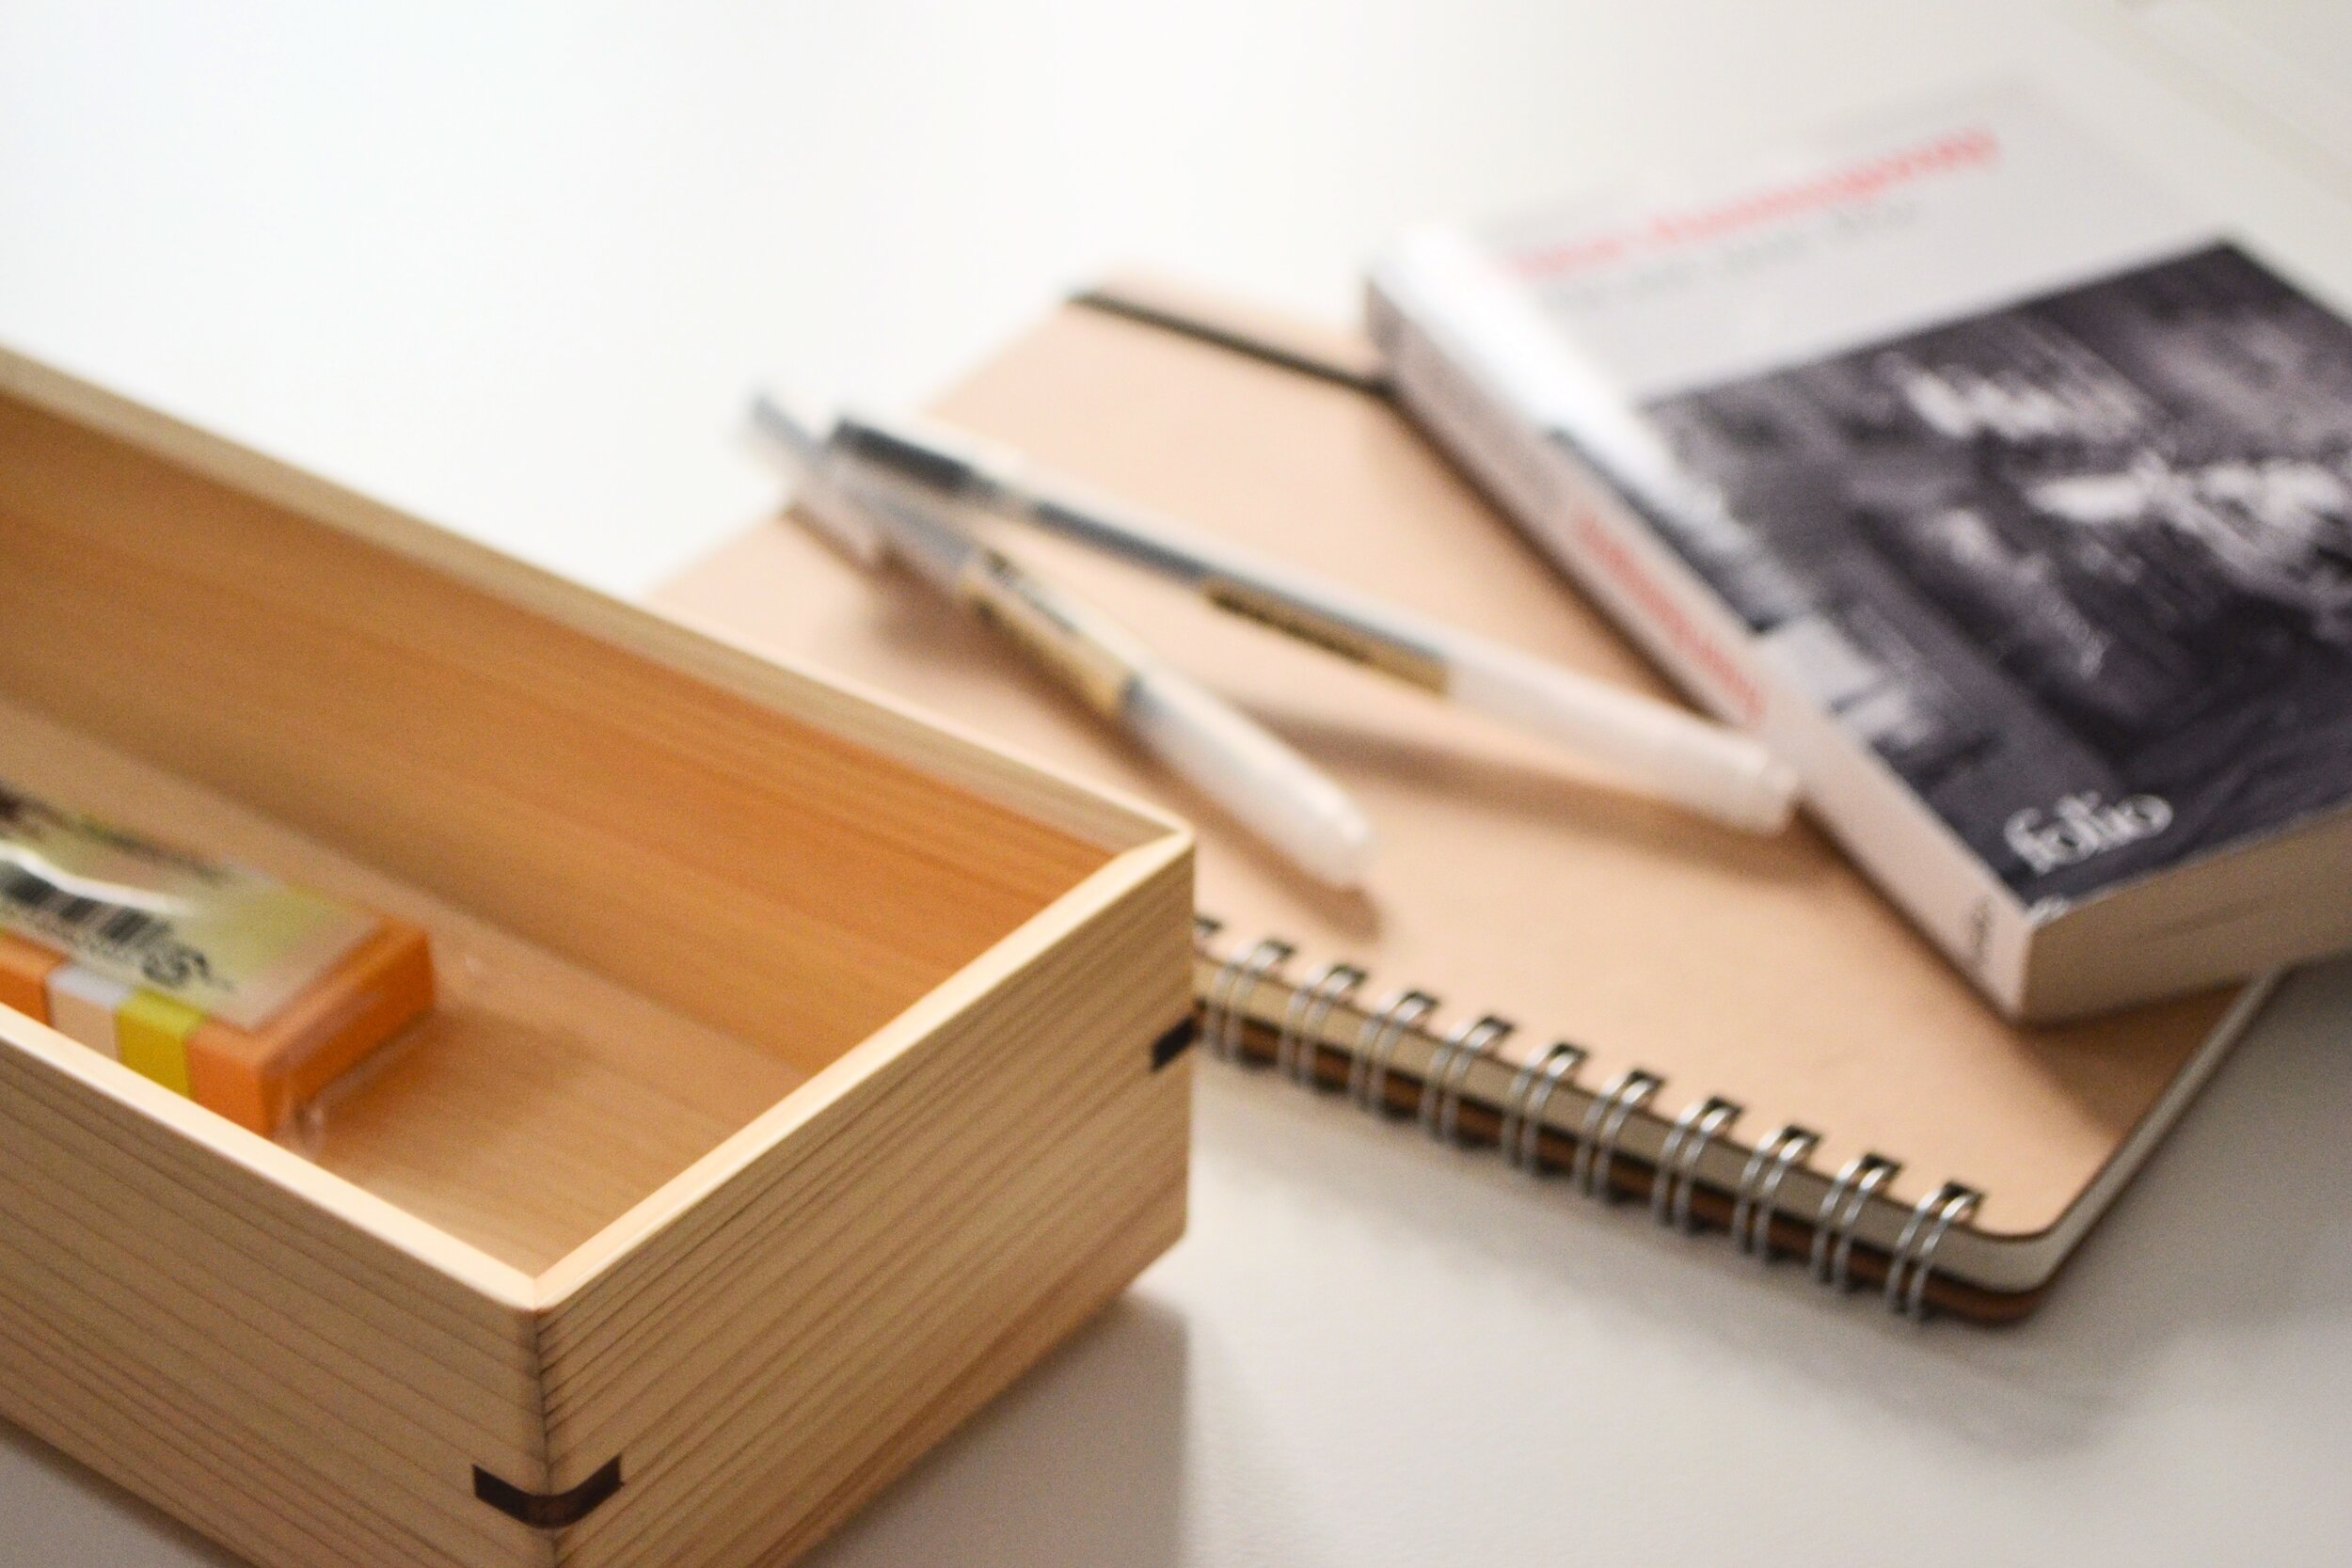 Hako collection - hinoki boxes crafted by Toyooka Craft &amp; designed by Flavien Delbergue for Atelier Takumi (copie) (copie)